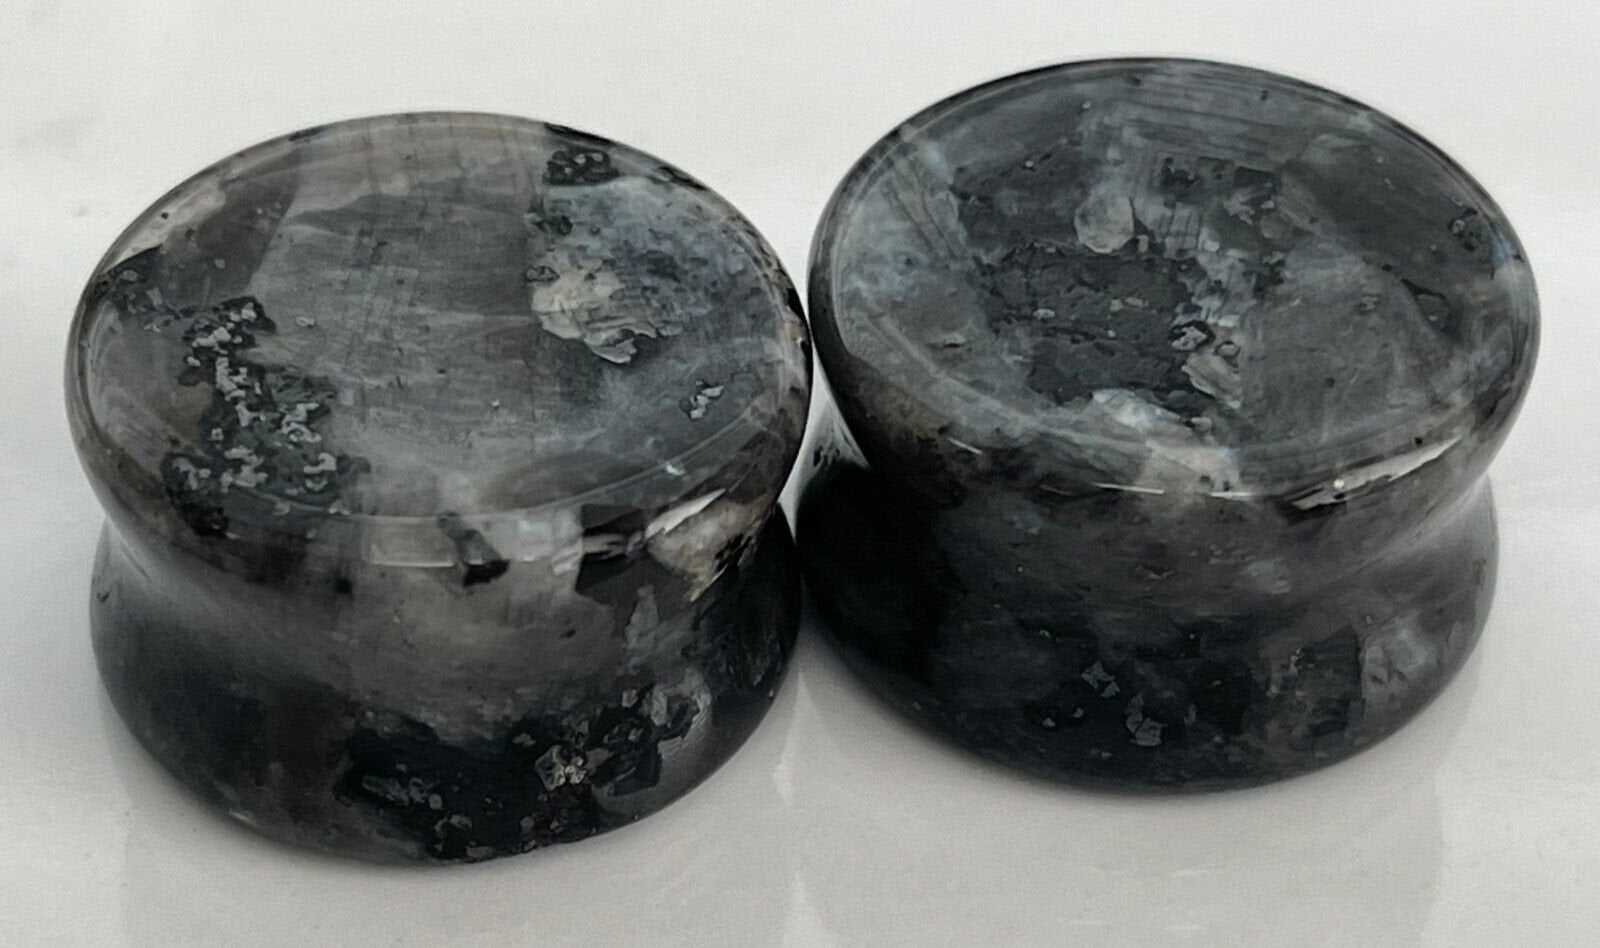 PAIR of Unique Natural Black Labradorite Organic Stone Double Flare Plugs/Tunnels - Gauges 2g (6mm) up to 3/4" (19mm) available!